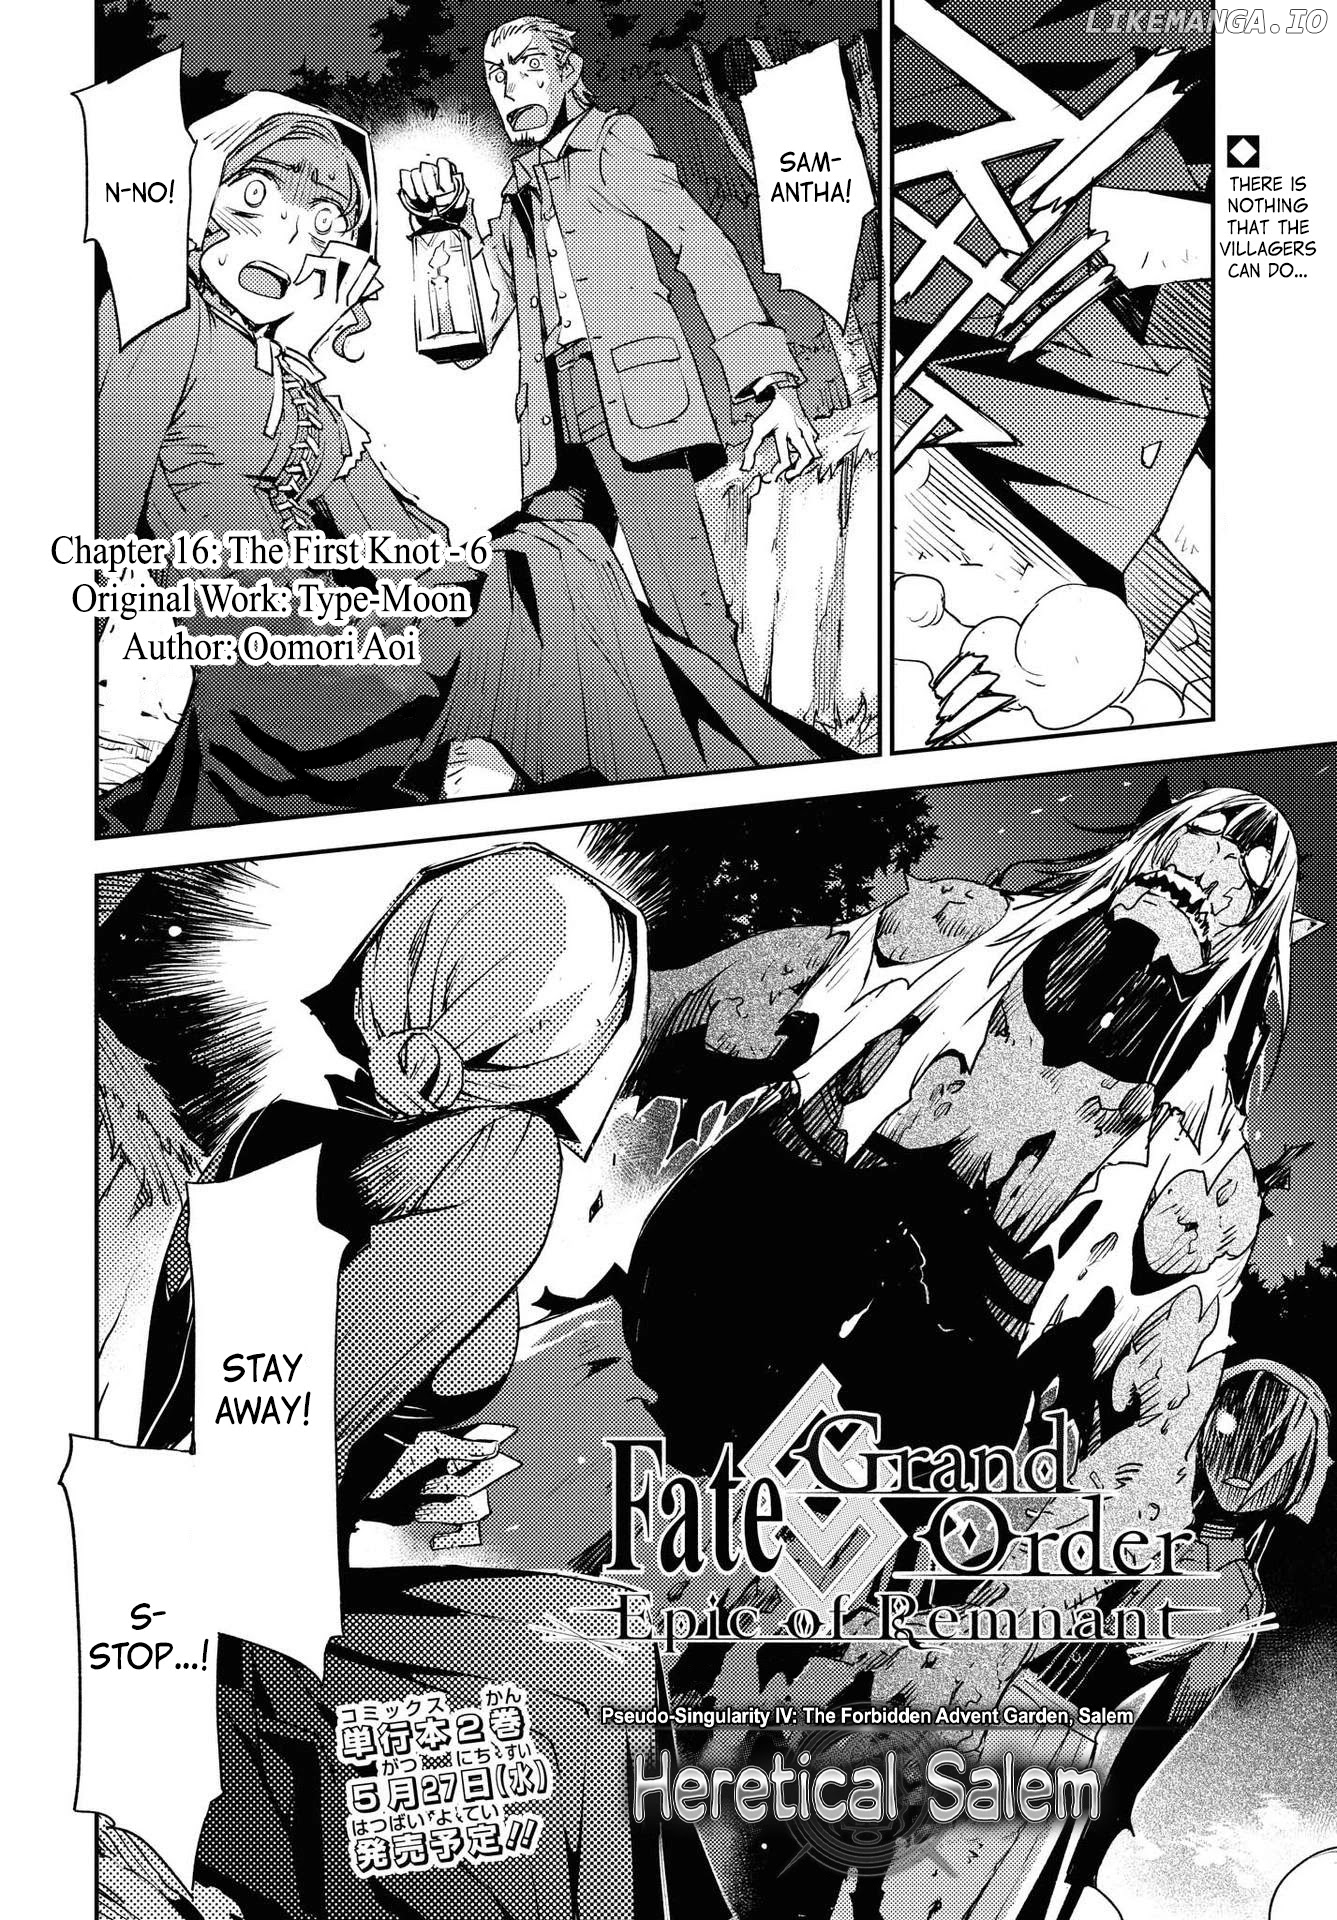 Fate/Grand Order: Epic of Remnant - Subspecies Singularity IV: Taboo Advent Salem: Salem of Heresy chapter 16 - page 2